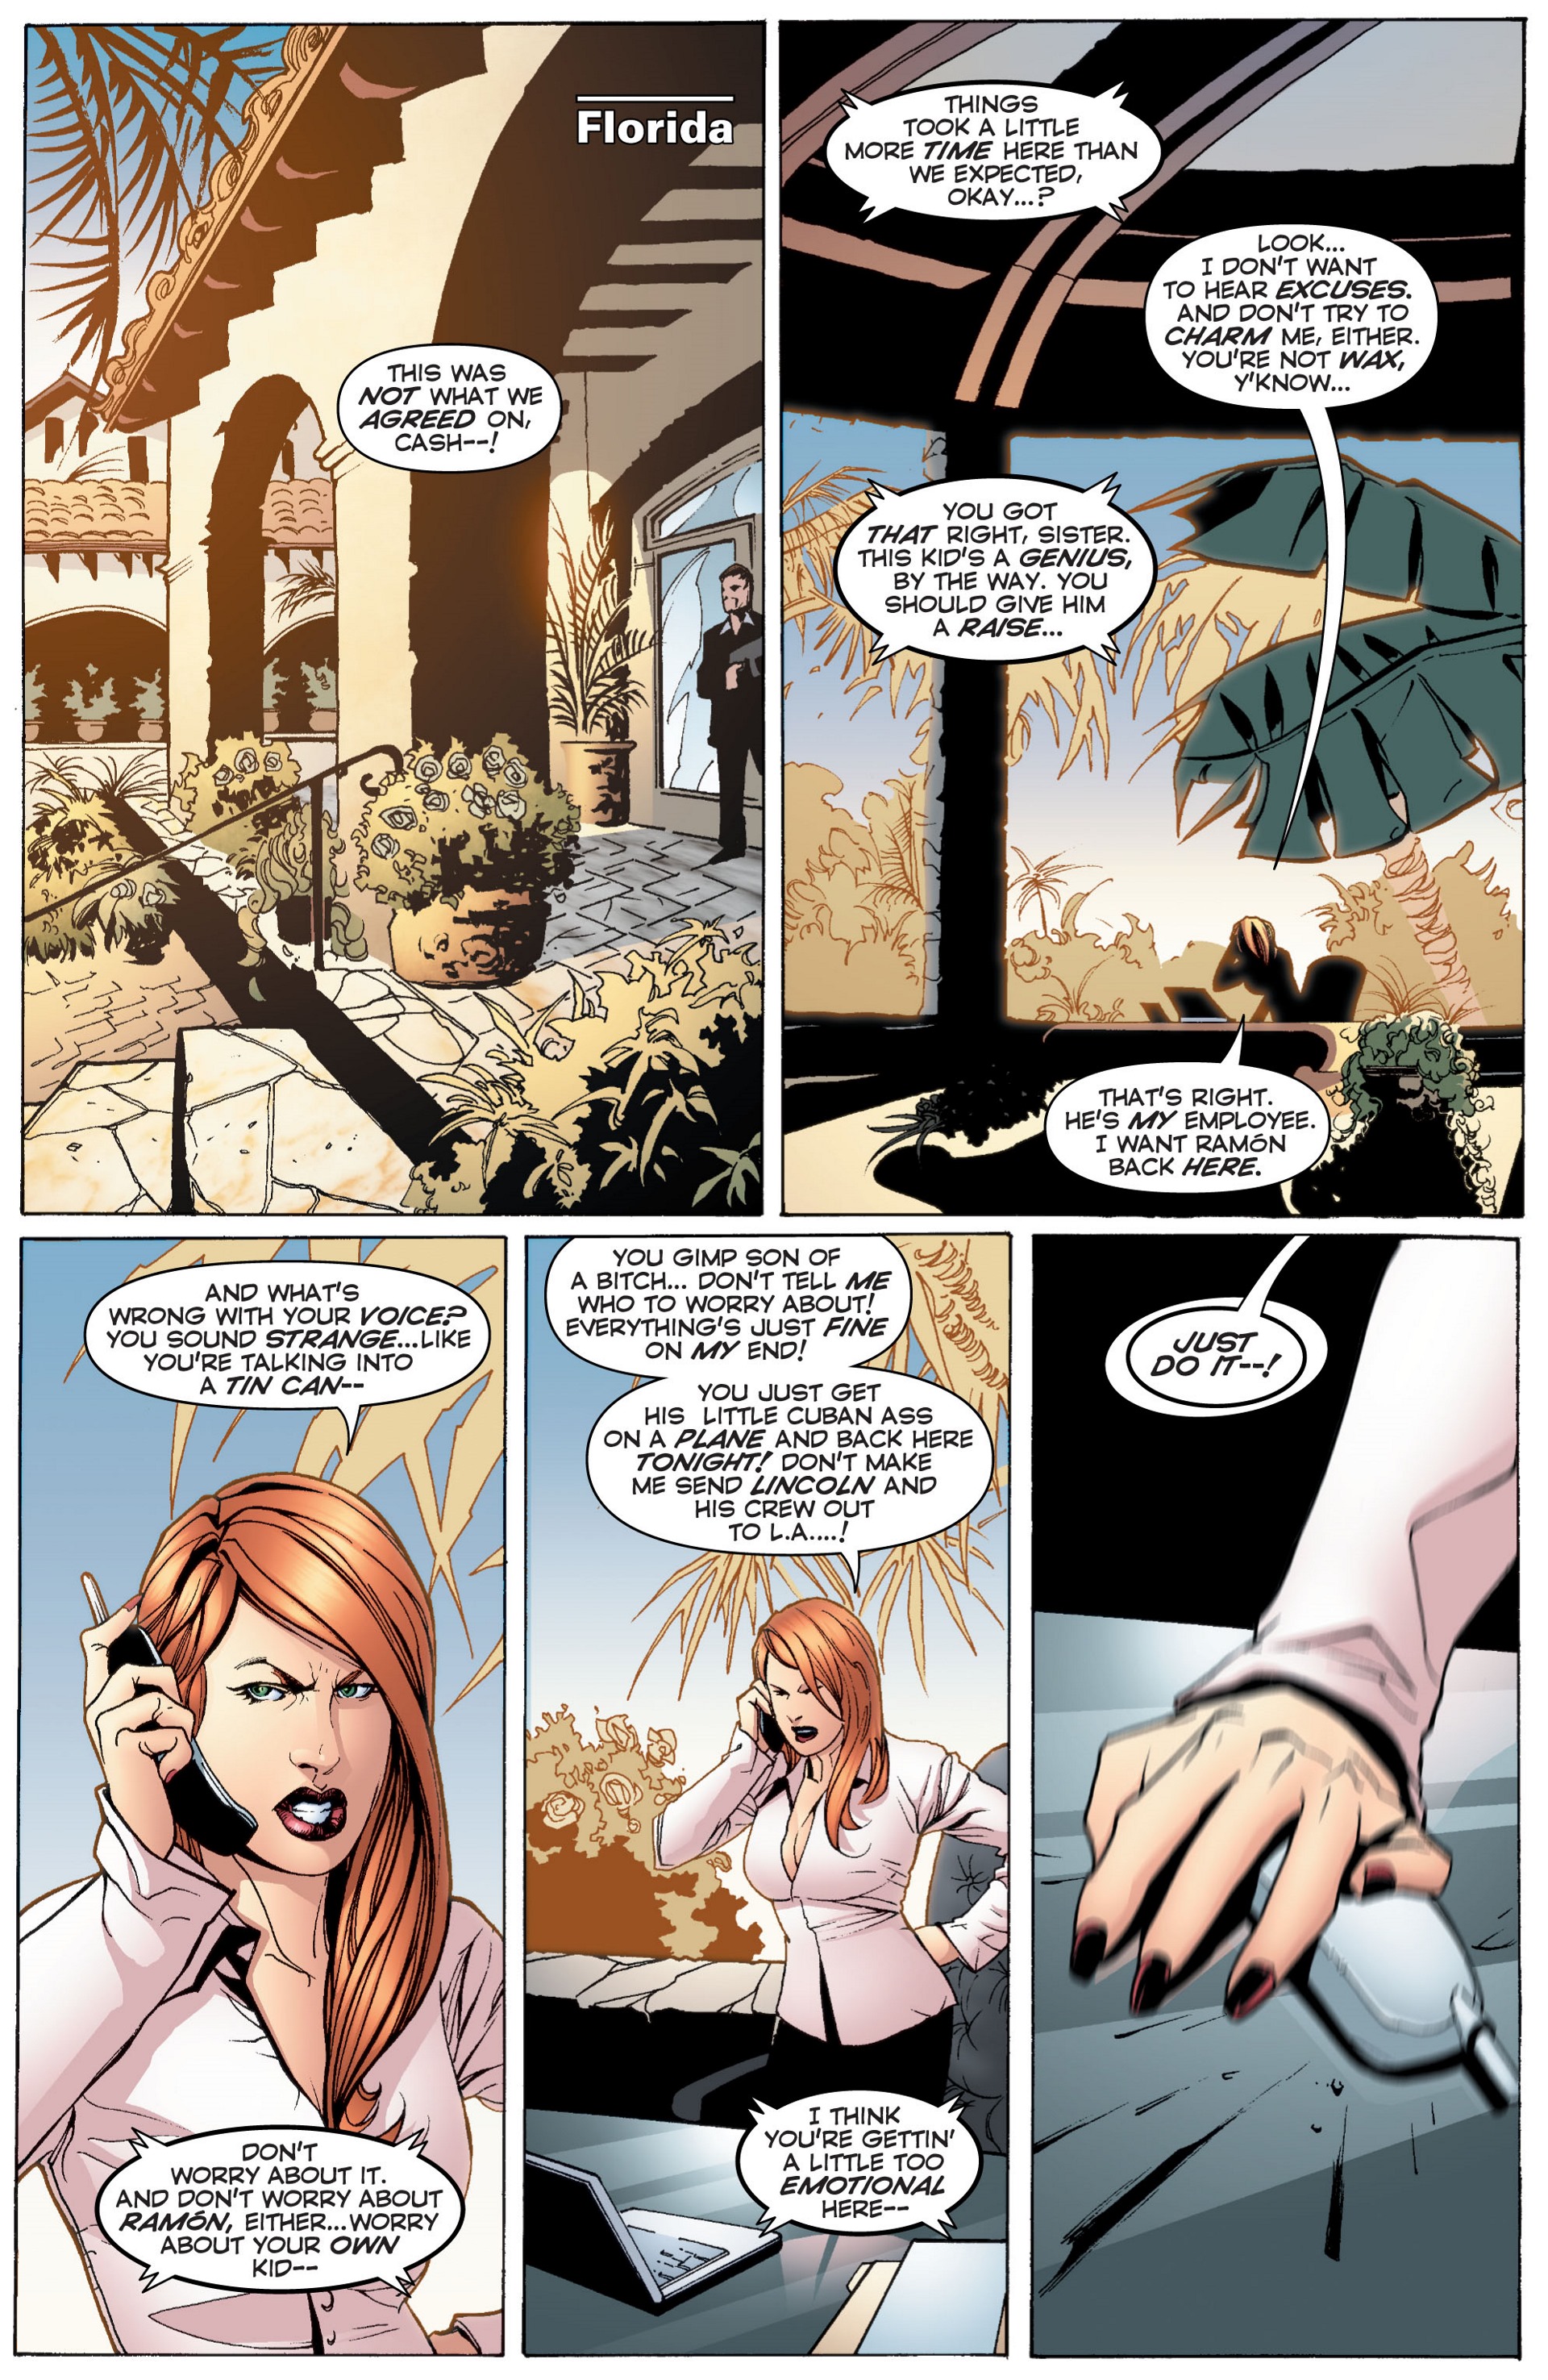 Wildcats Version 3.0 Issue #16 #16 - English 11